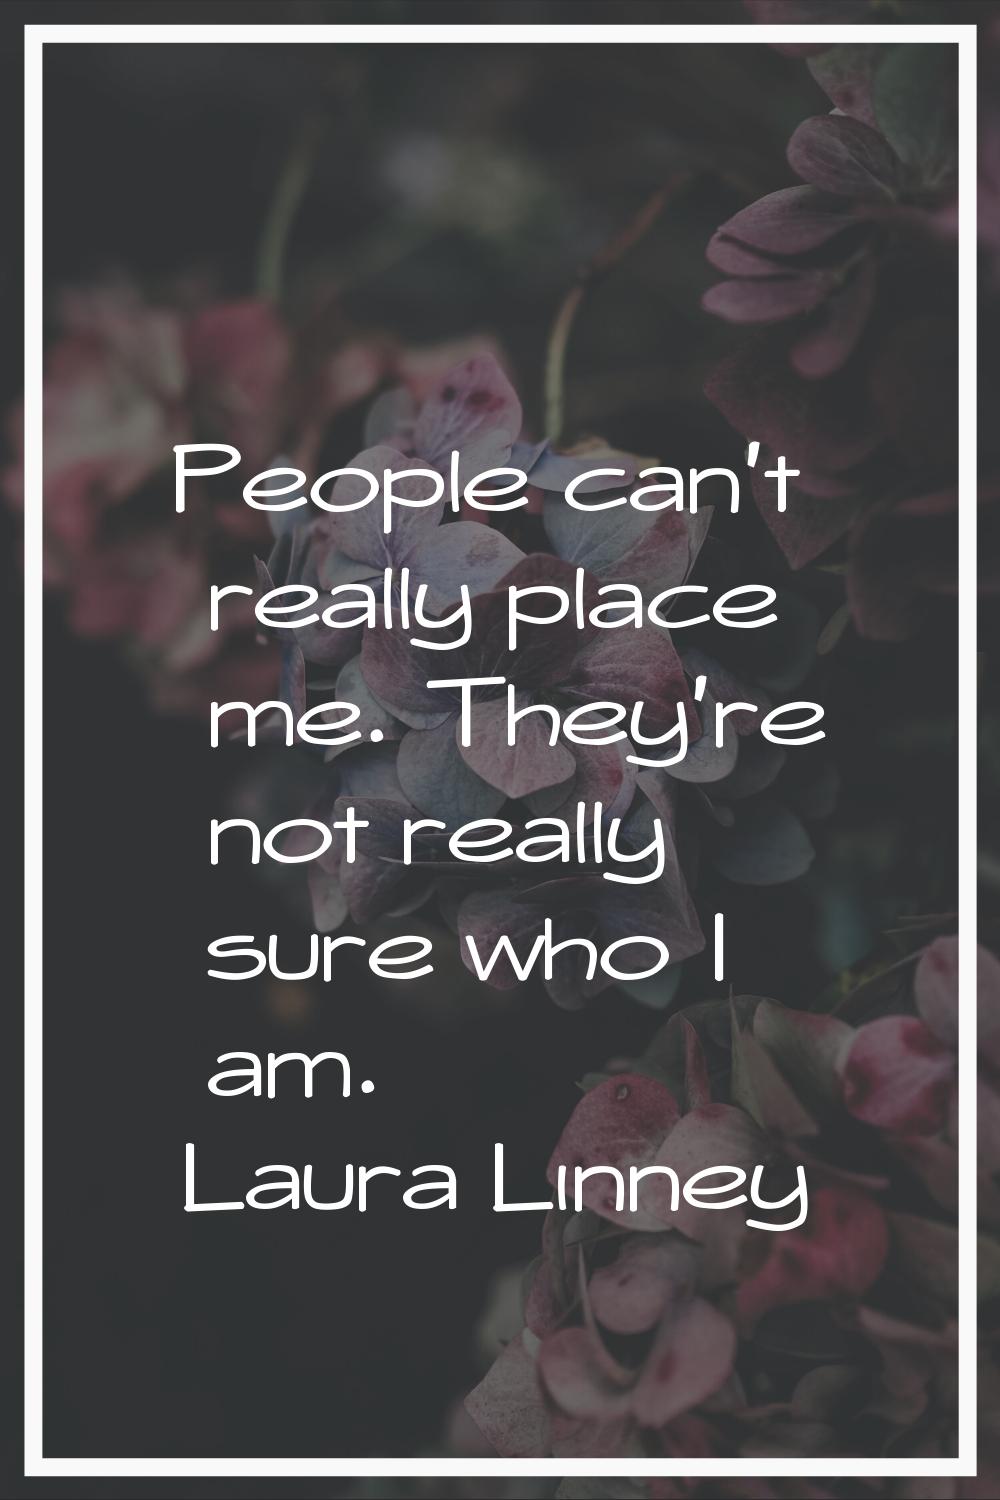 People can't really place me. They're not really sure who I am.